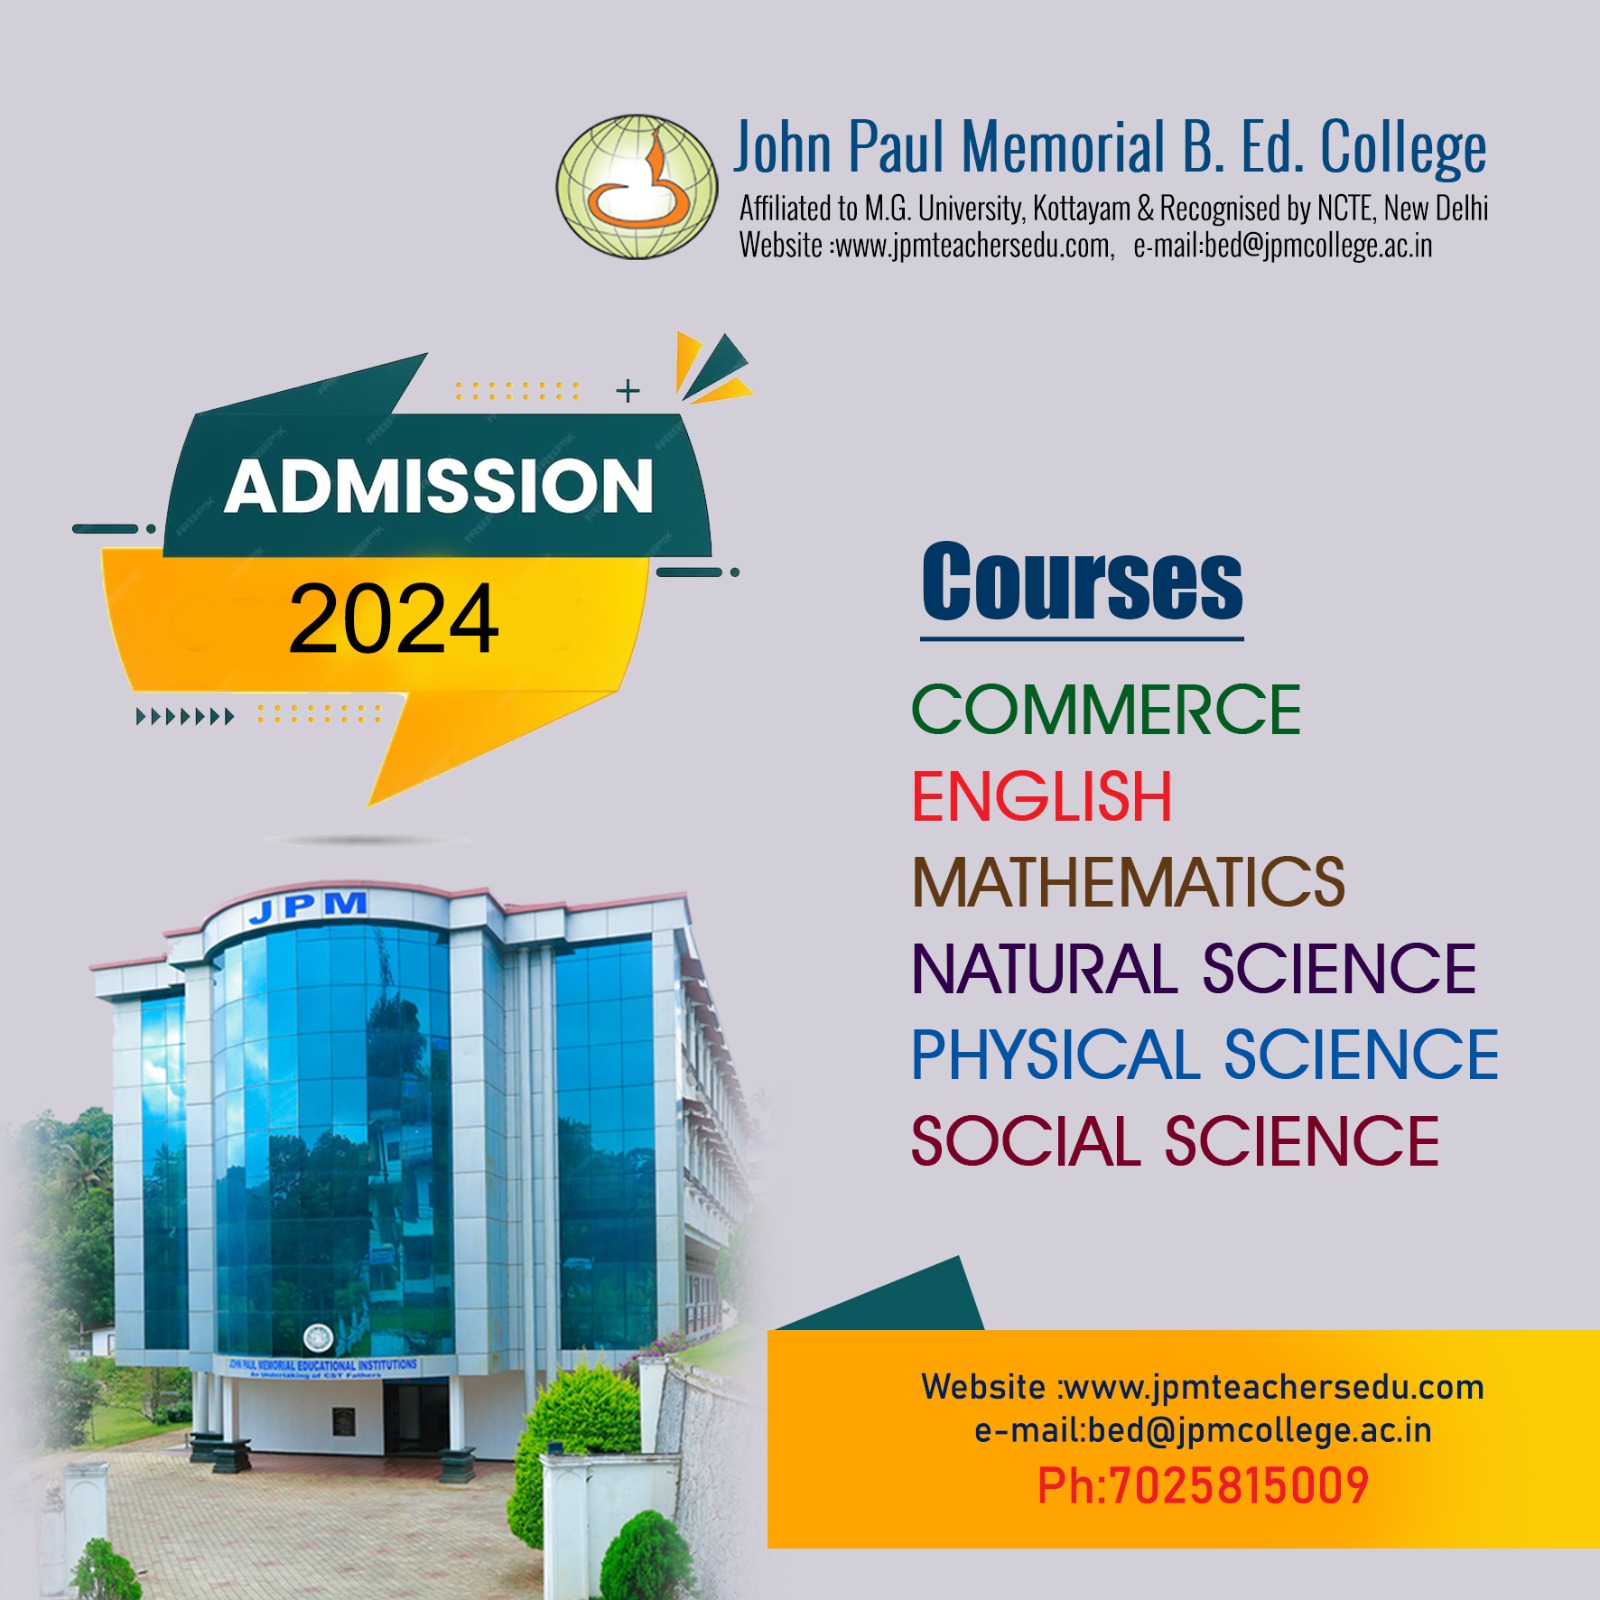 John Paul Memorial B.Ed. College | One of the pioneer institution in the field of teacher education